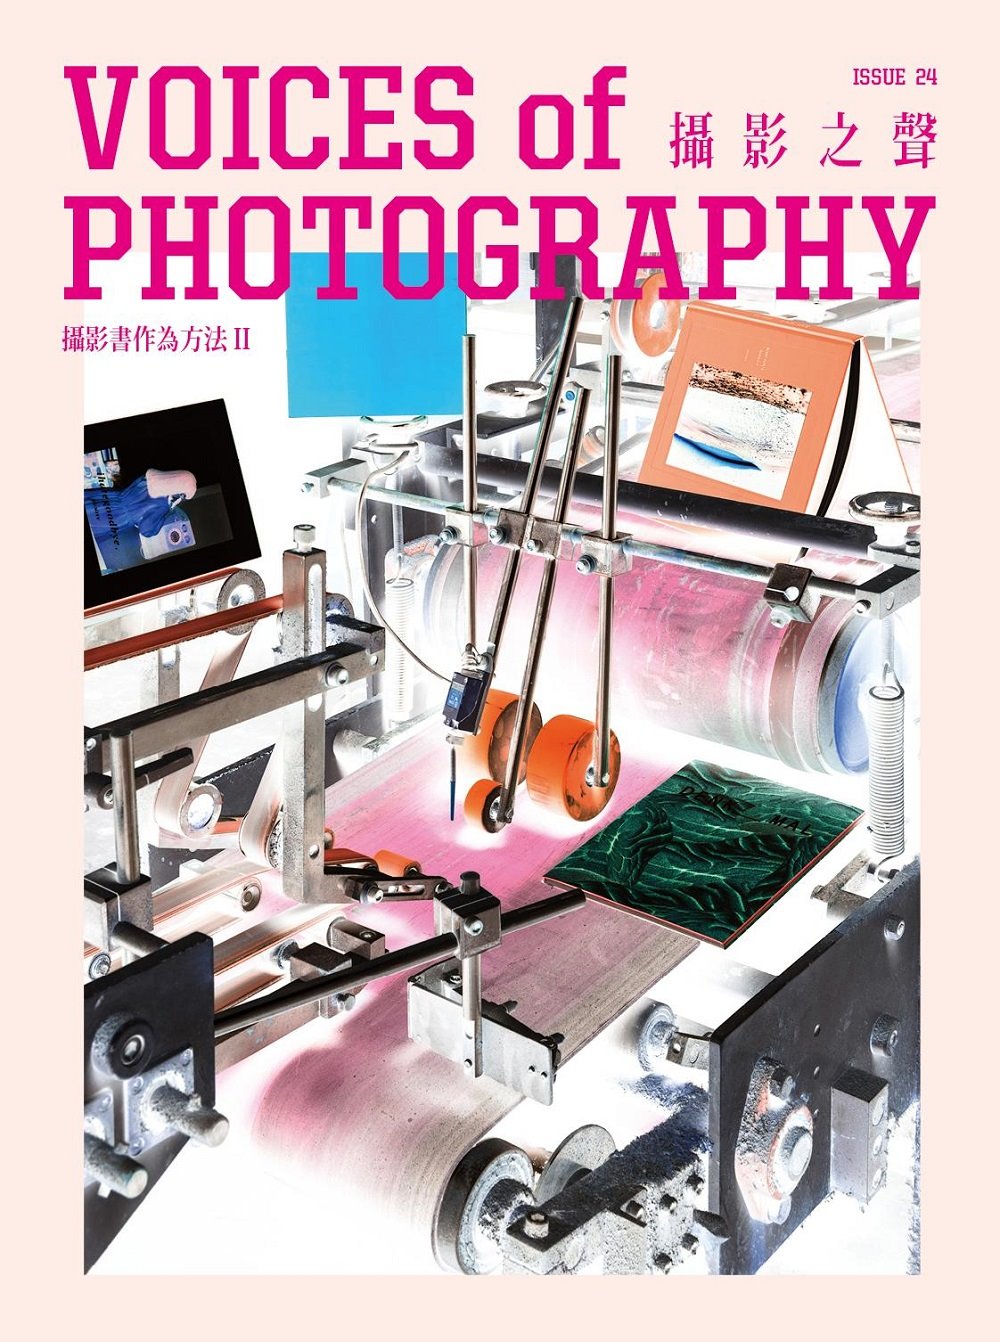 Voices of Photography - 攝影之聲 2018第24期